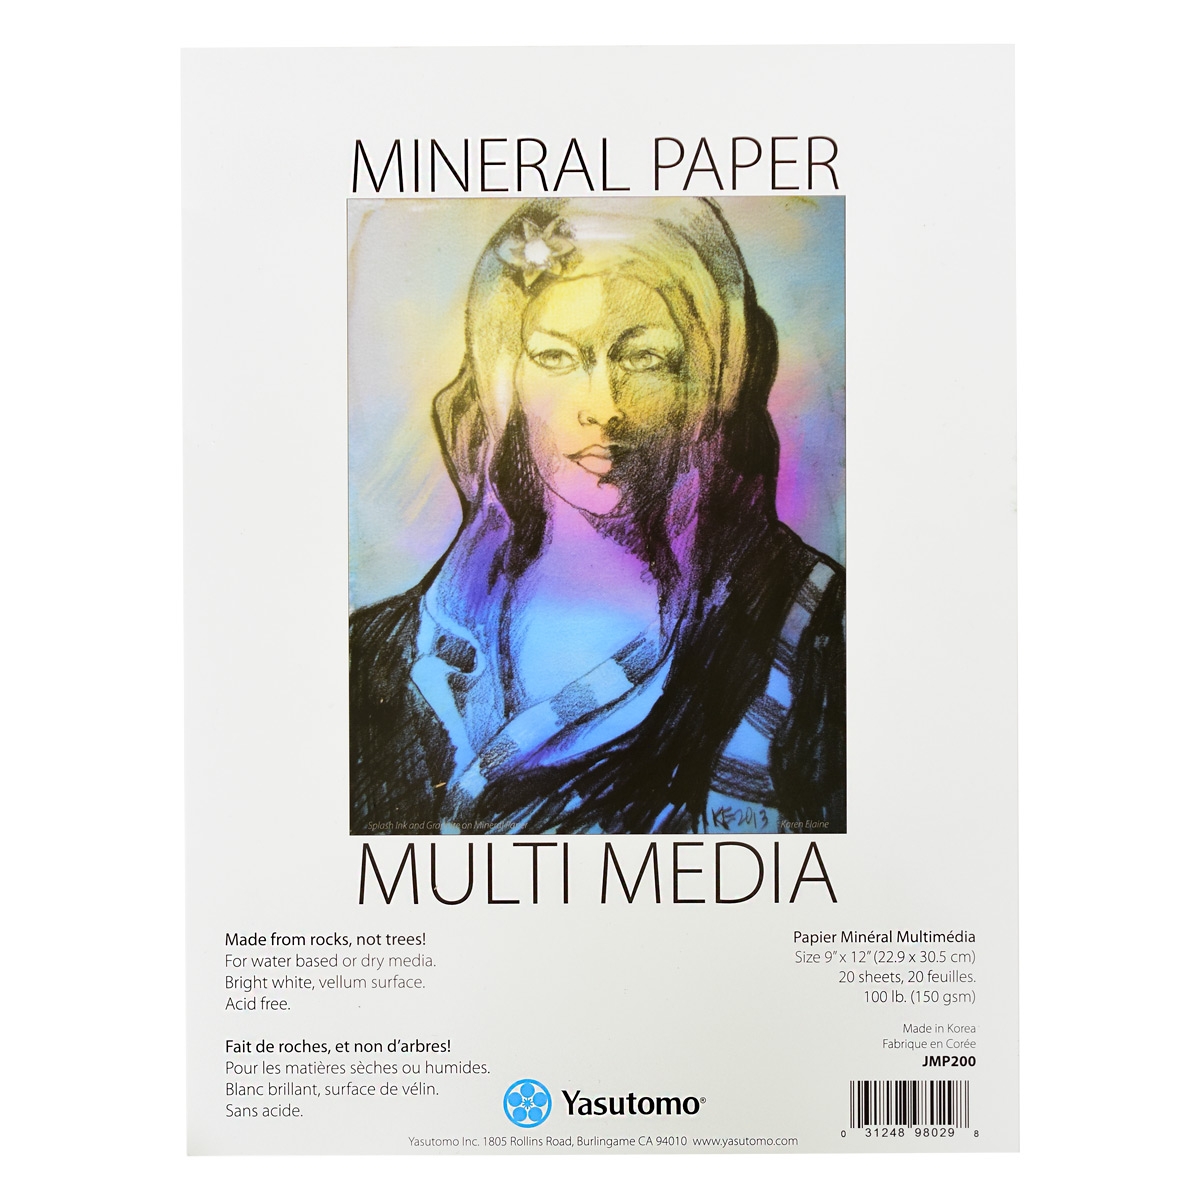 Canson Artist Series Mixed Media Paper, Wirebound Pad, 9x12 inches, 30  Sheets (138lb/224g) - Artist Paper for Adults and Students - Watercolor,  Gouache, Graphite, Ink, Pencil, Marker 